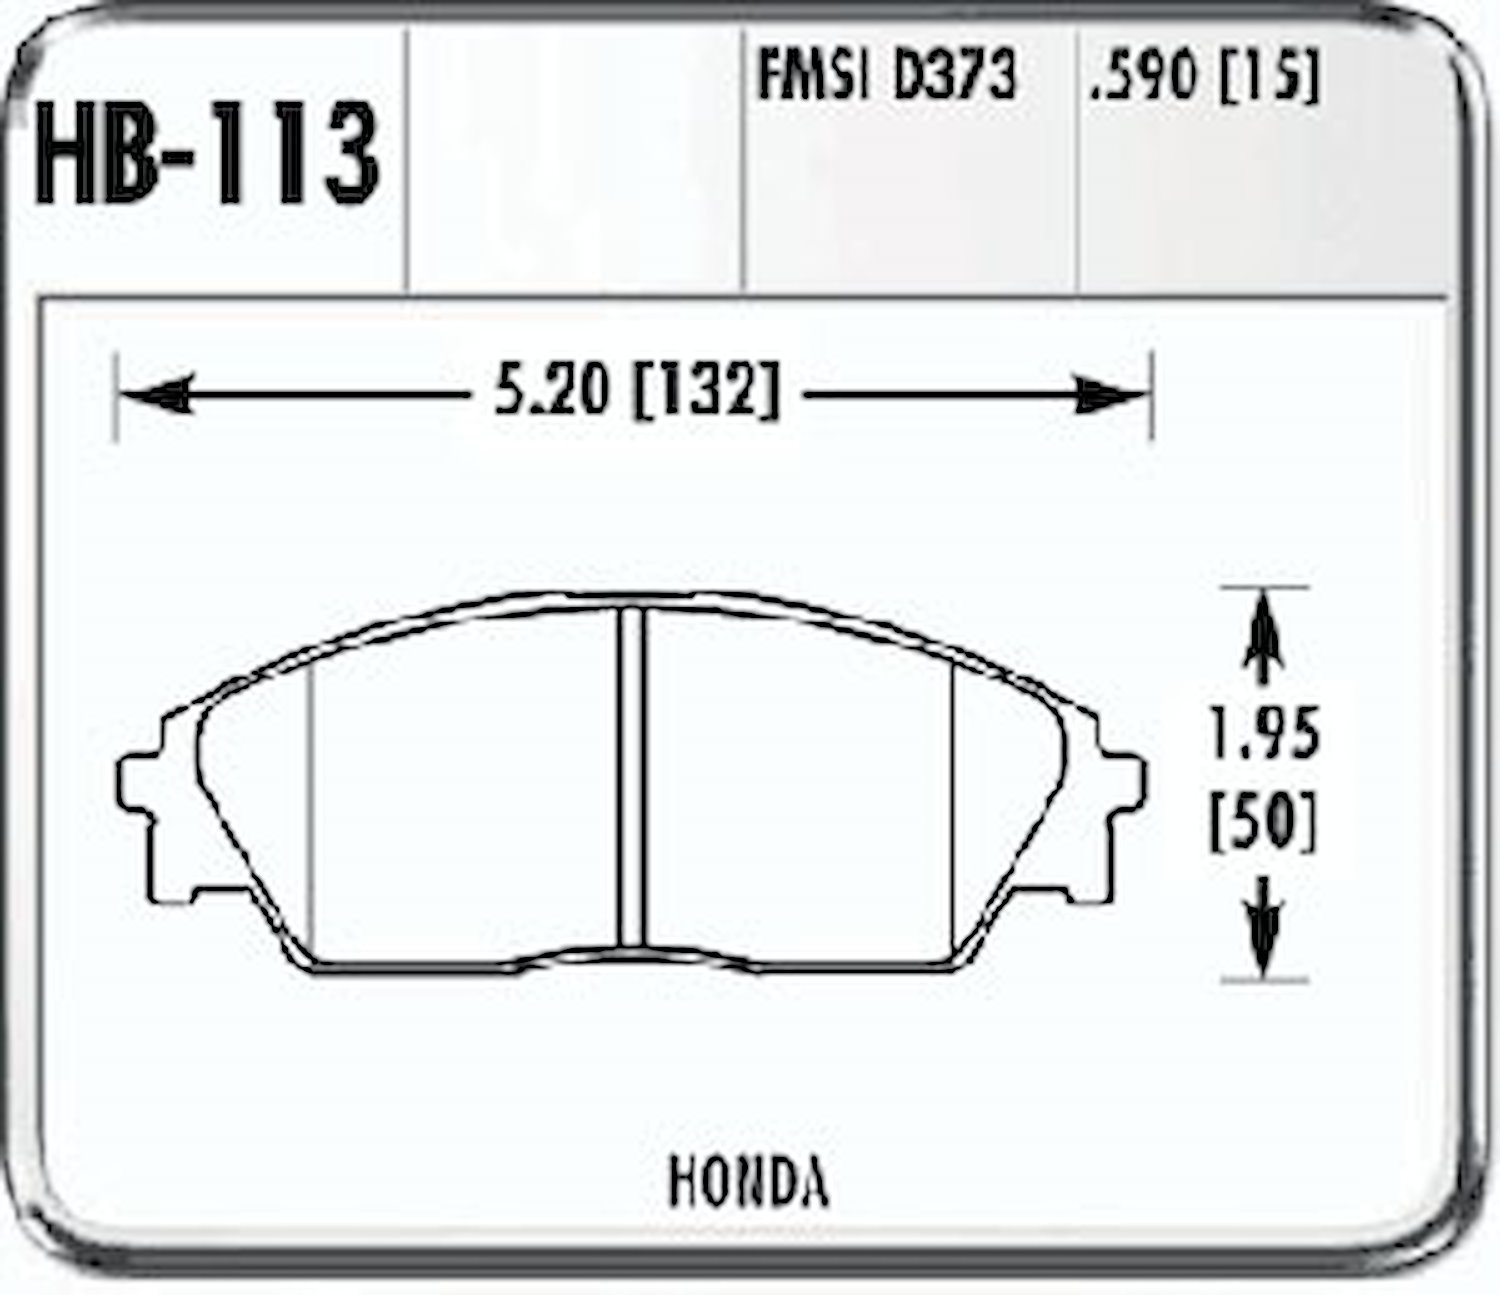 Hawk High Performance Front Brake Pads Fits: 88-91 Civic Wgn